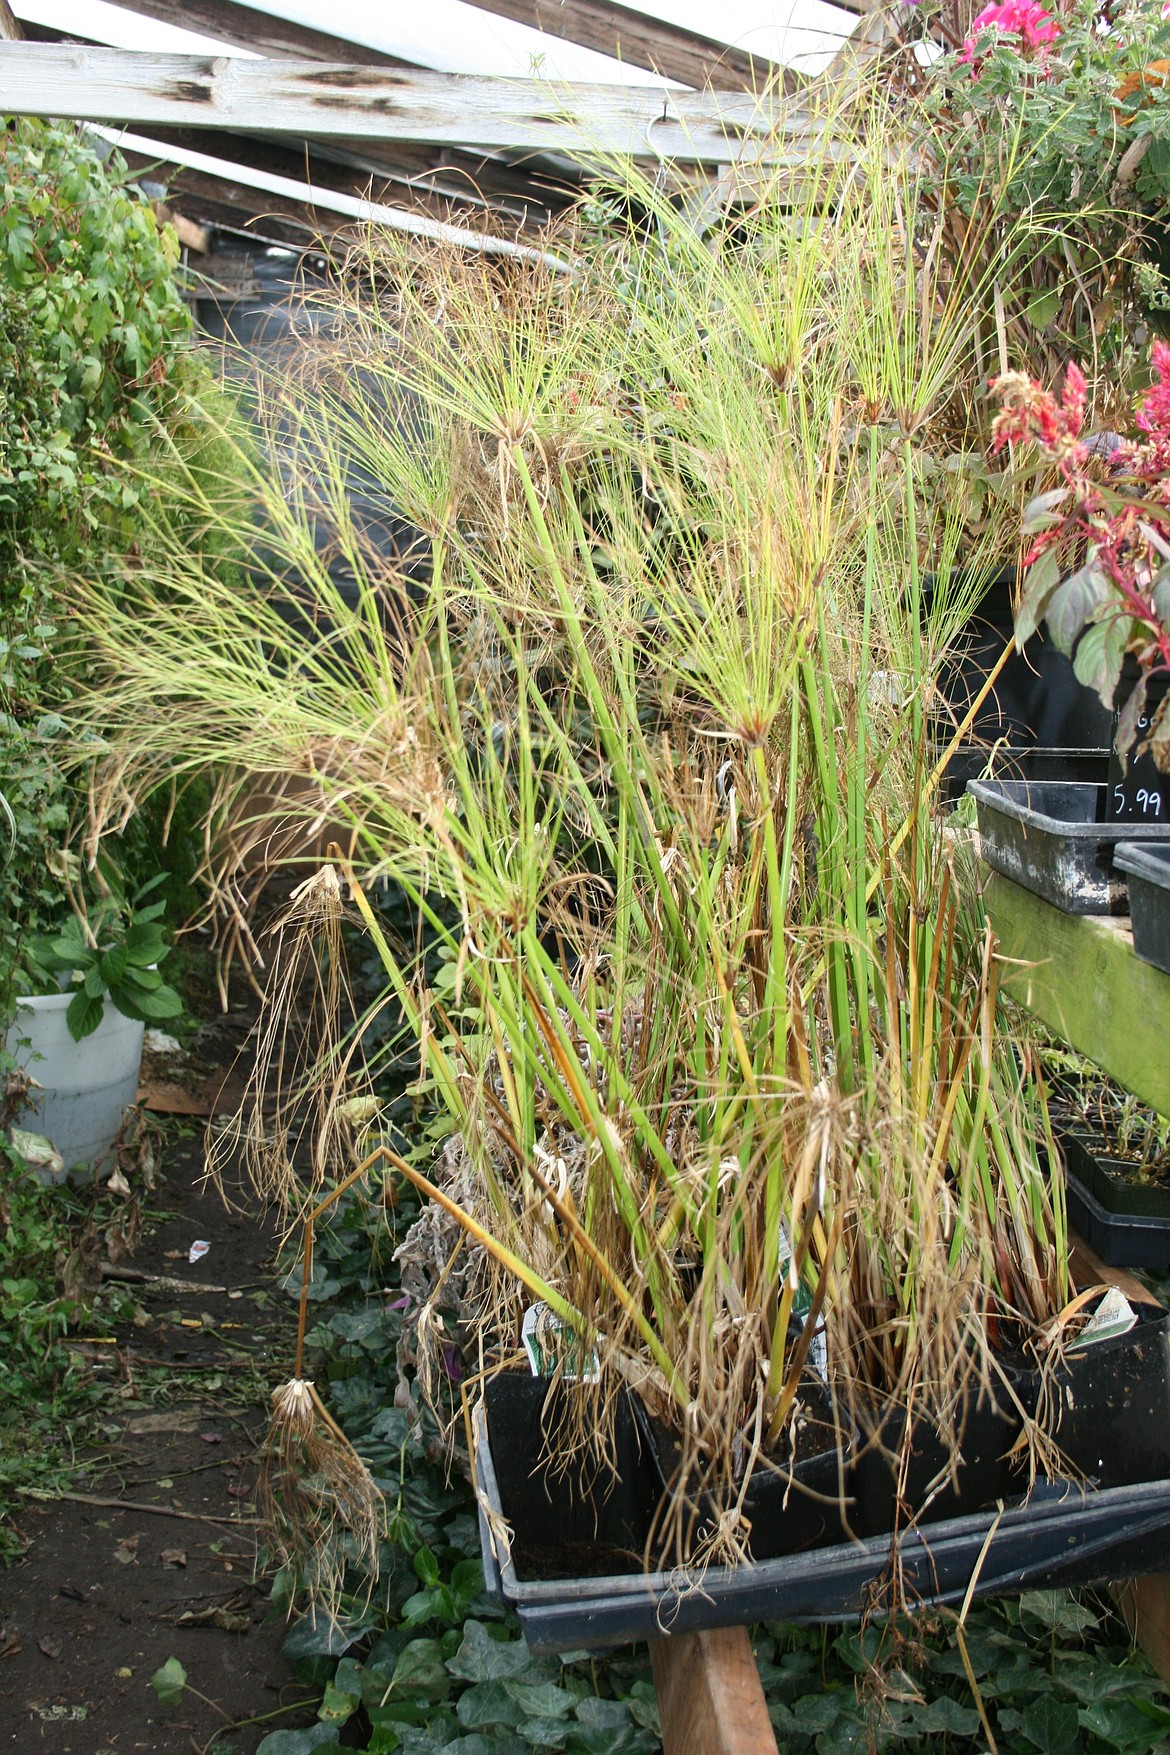 Papyrus reeds in the greenhouse at Edwards Nursery in Moses Lake Wednesday. Despite its Mediterranean origins, papyrus can survive a north central Washington winter with proper care, said nursery owner Karen Edwards.